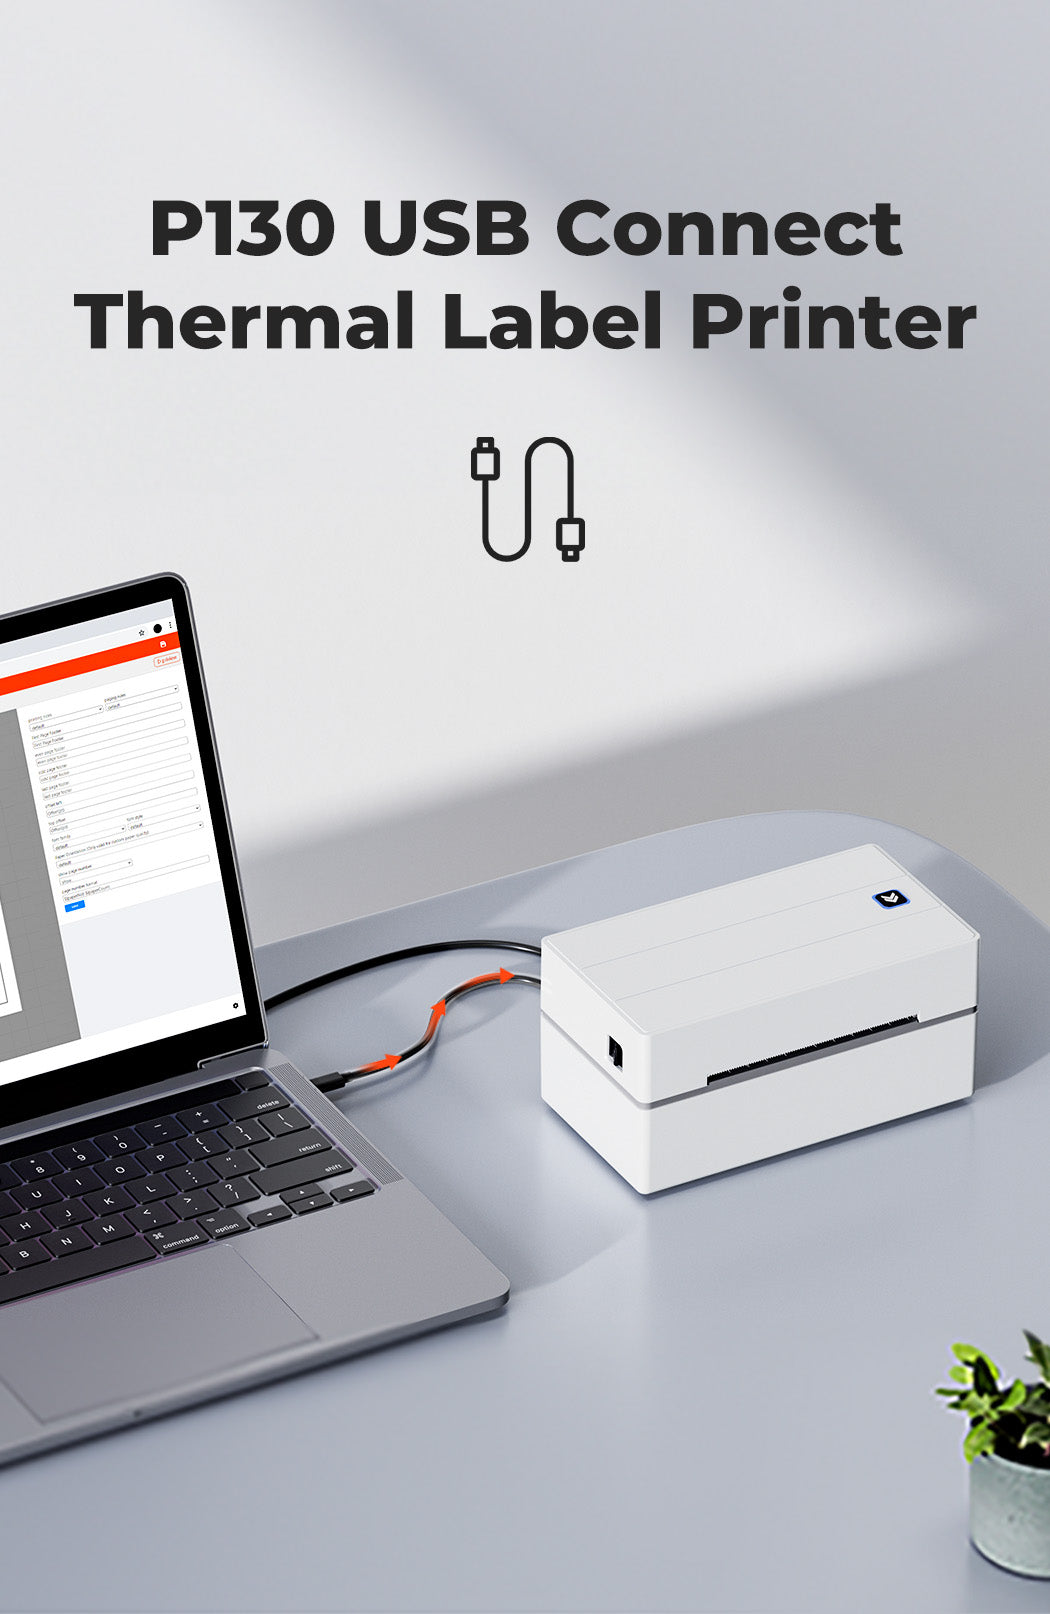 MUNBYN P130 white direct thermal label printer is the perfect choice for office workers who need a reliable and fast shipping label printer.